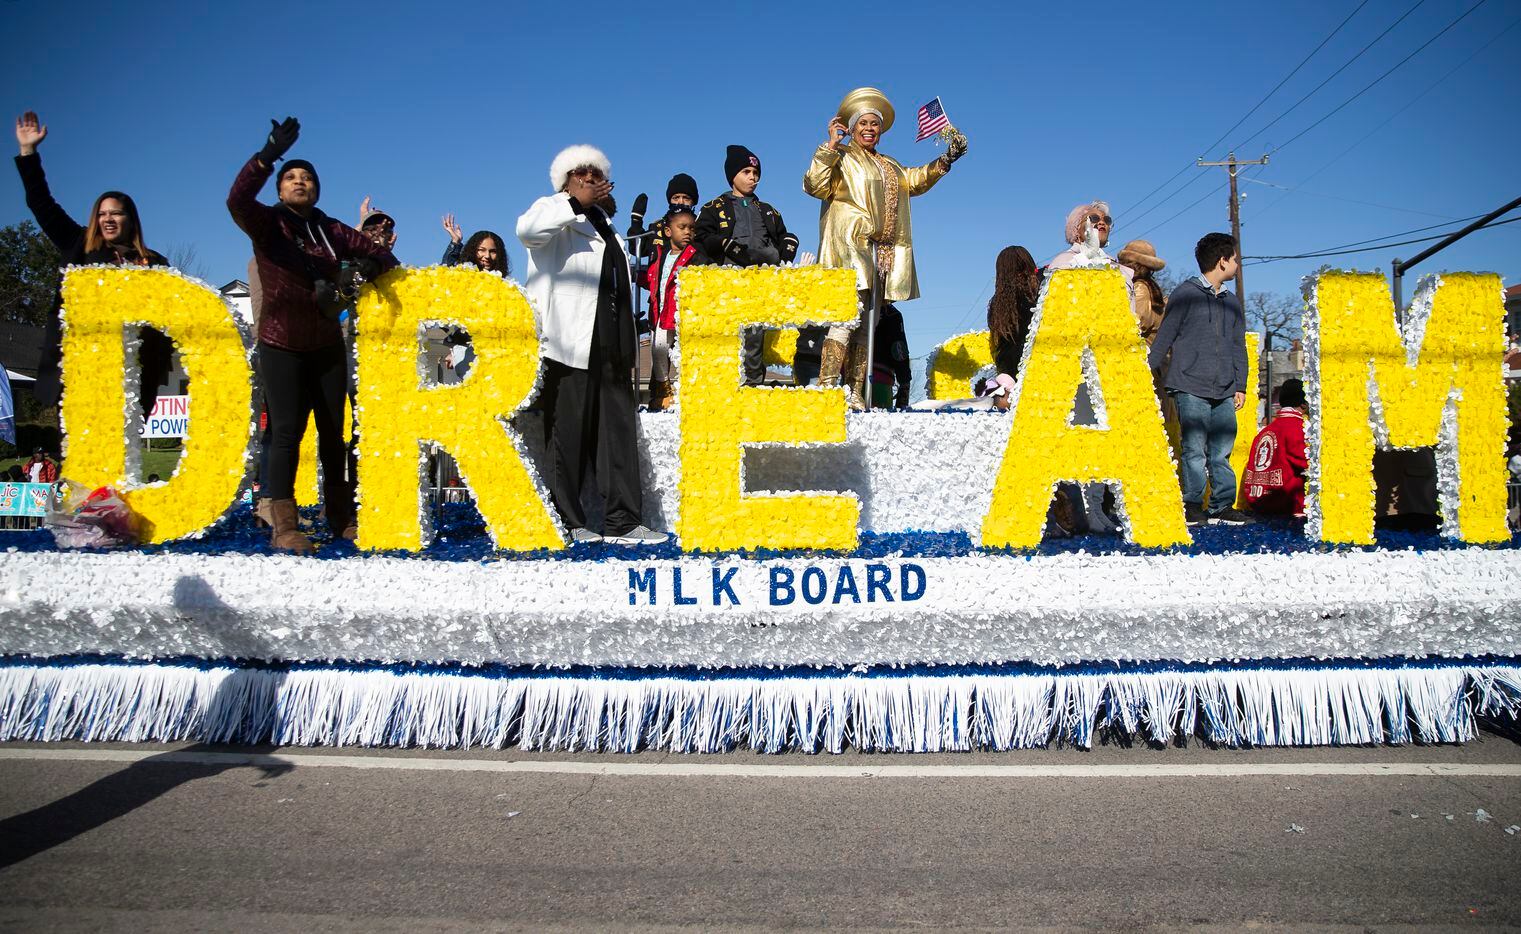 The MLK Board waves as they make their way down Martin Luther King Jr. Blvd during the 38th annual MLK Parade on Jan. 20, 2020 in Dallas. (Juan Figueroa/ The Dallas Morning News)